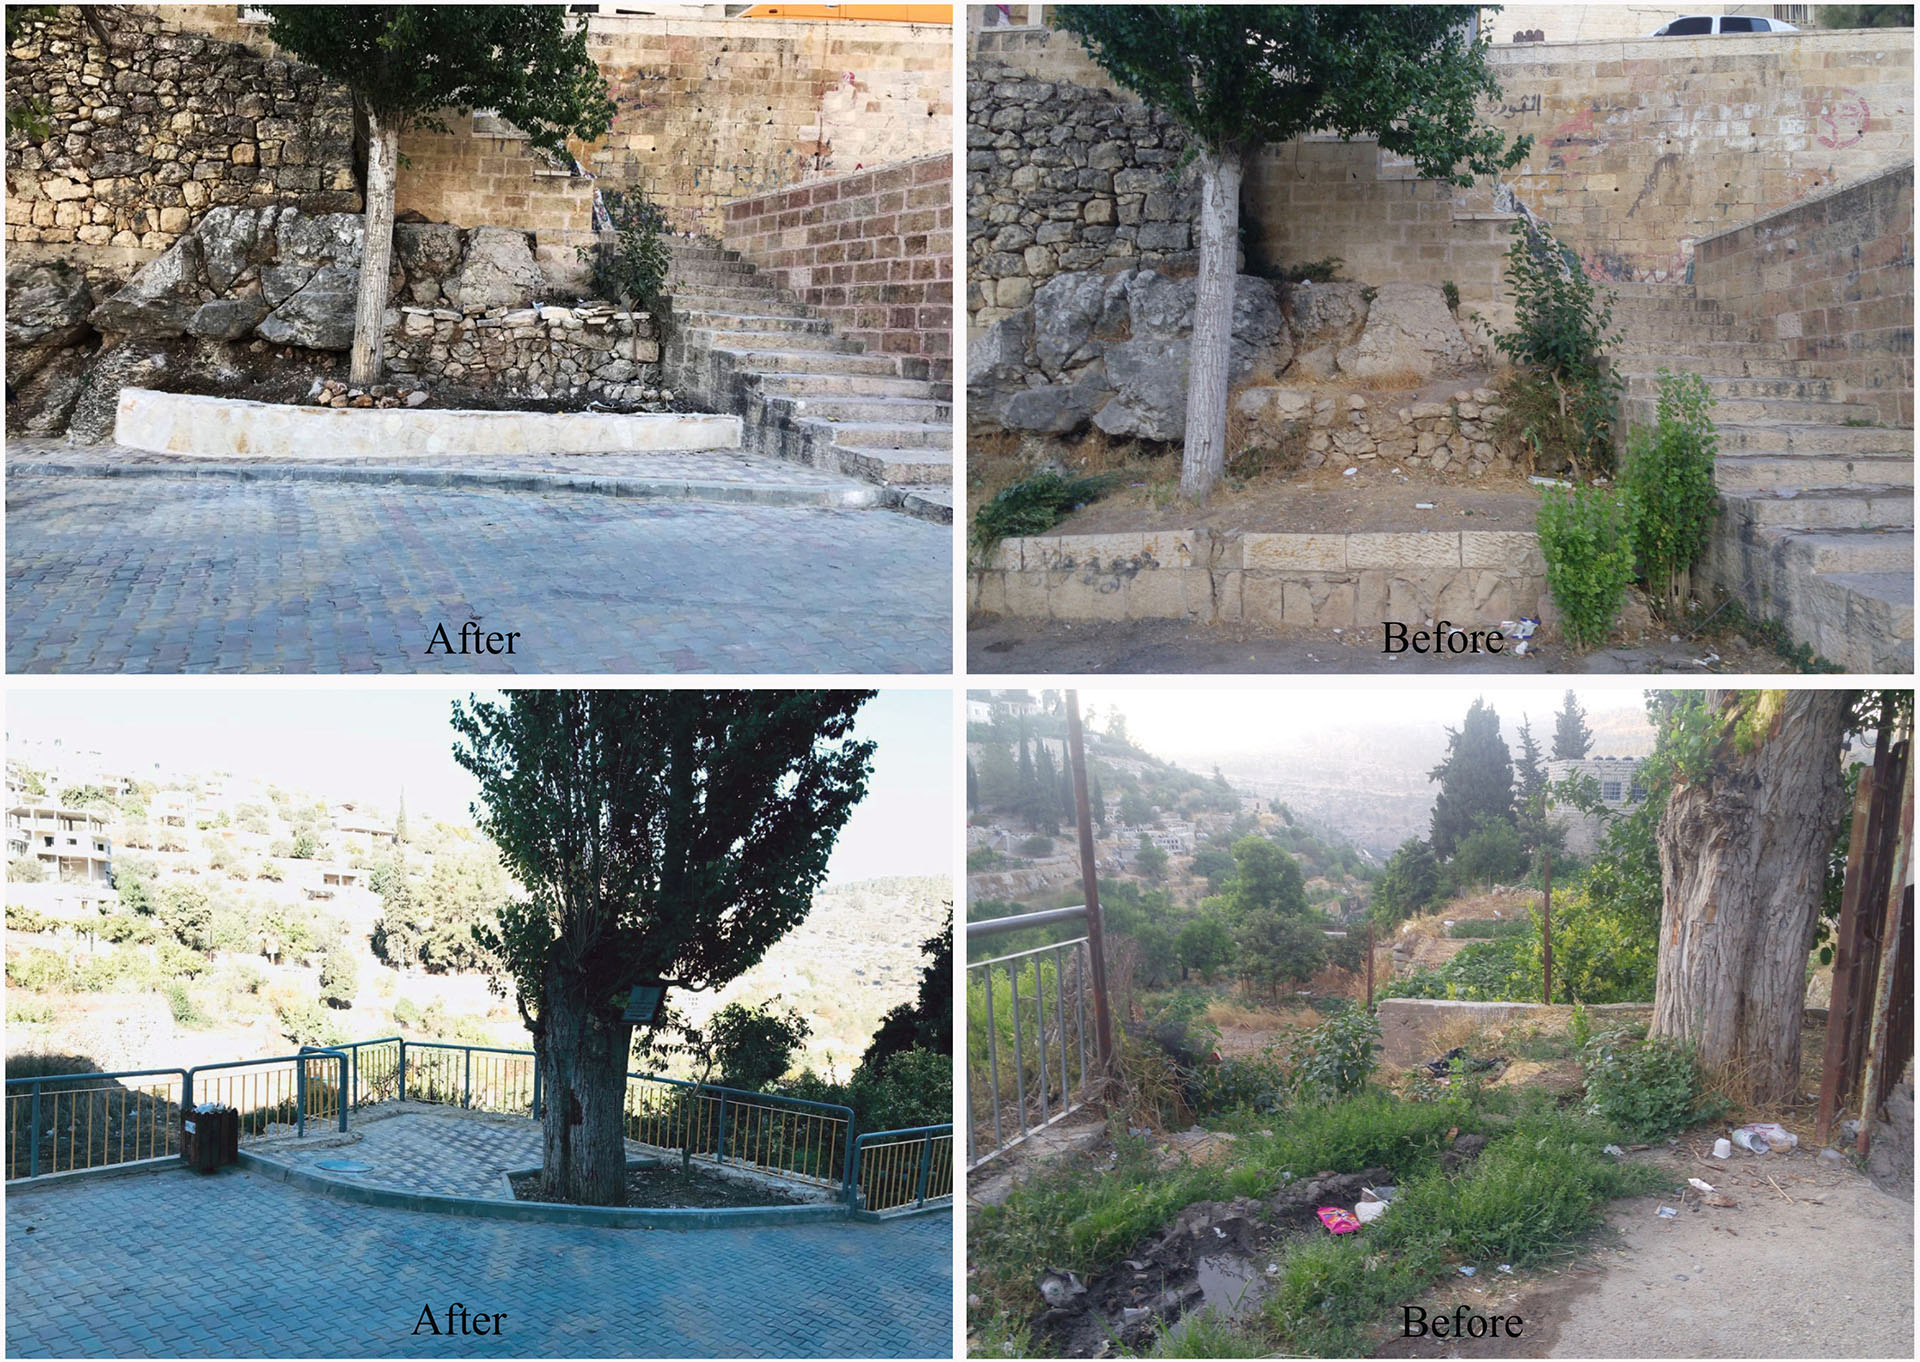 <p>Landscape Scenery near Ein Al-Balad area before and after rehabilitation which decreased the environmental hazards.</p>